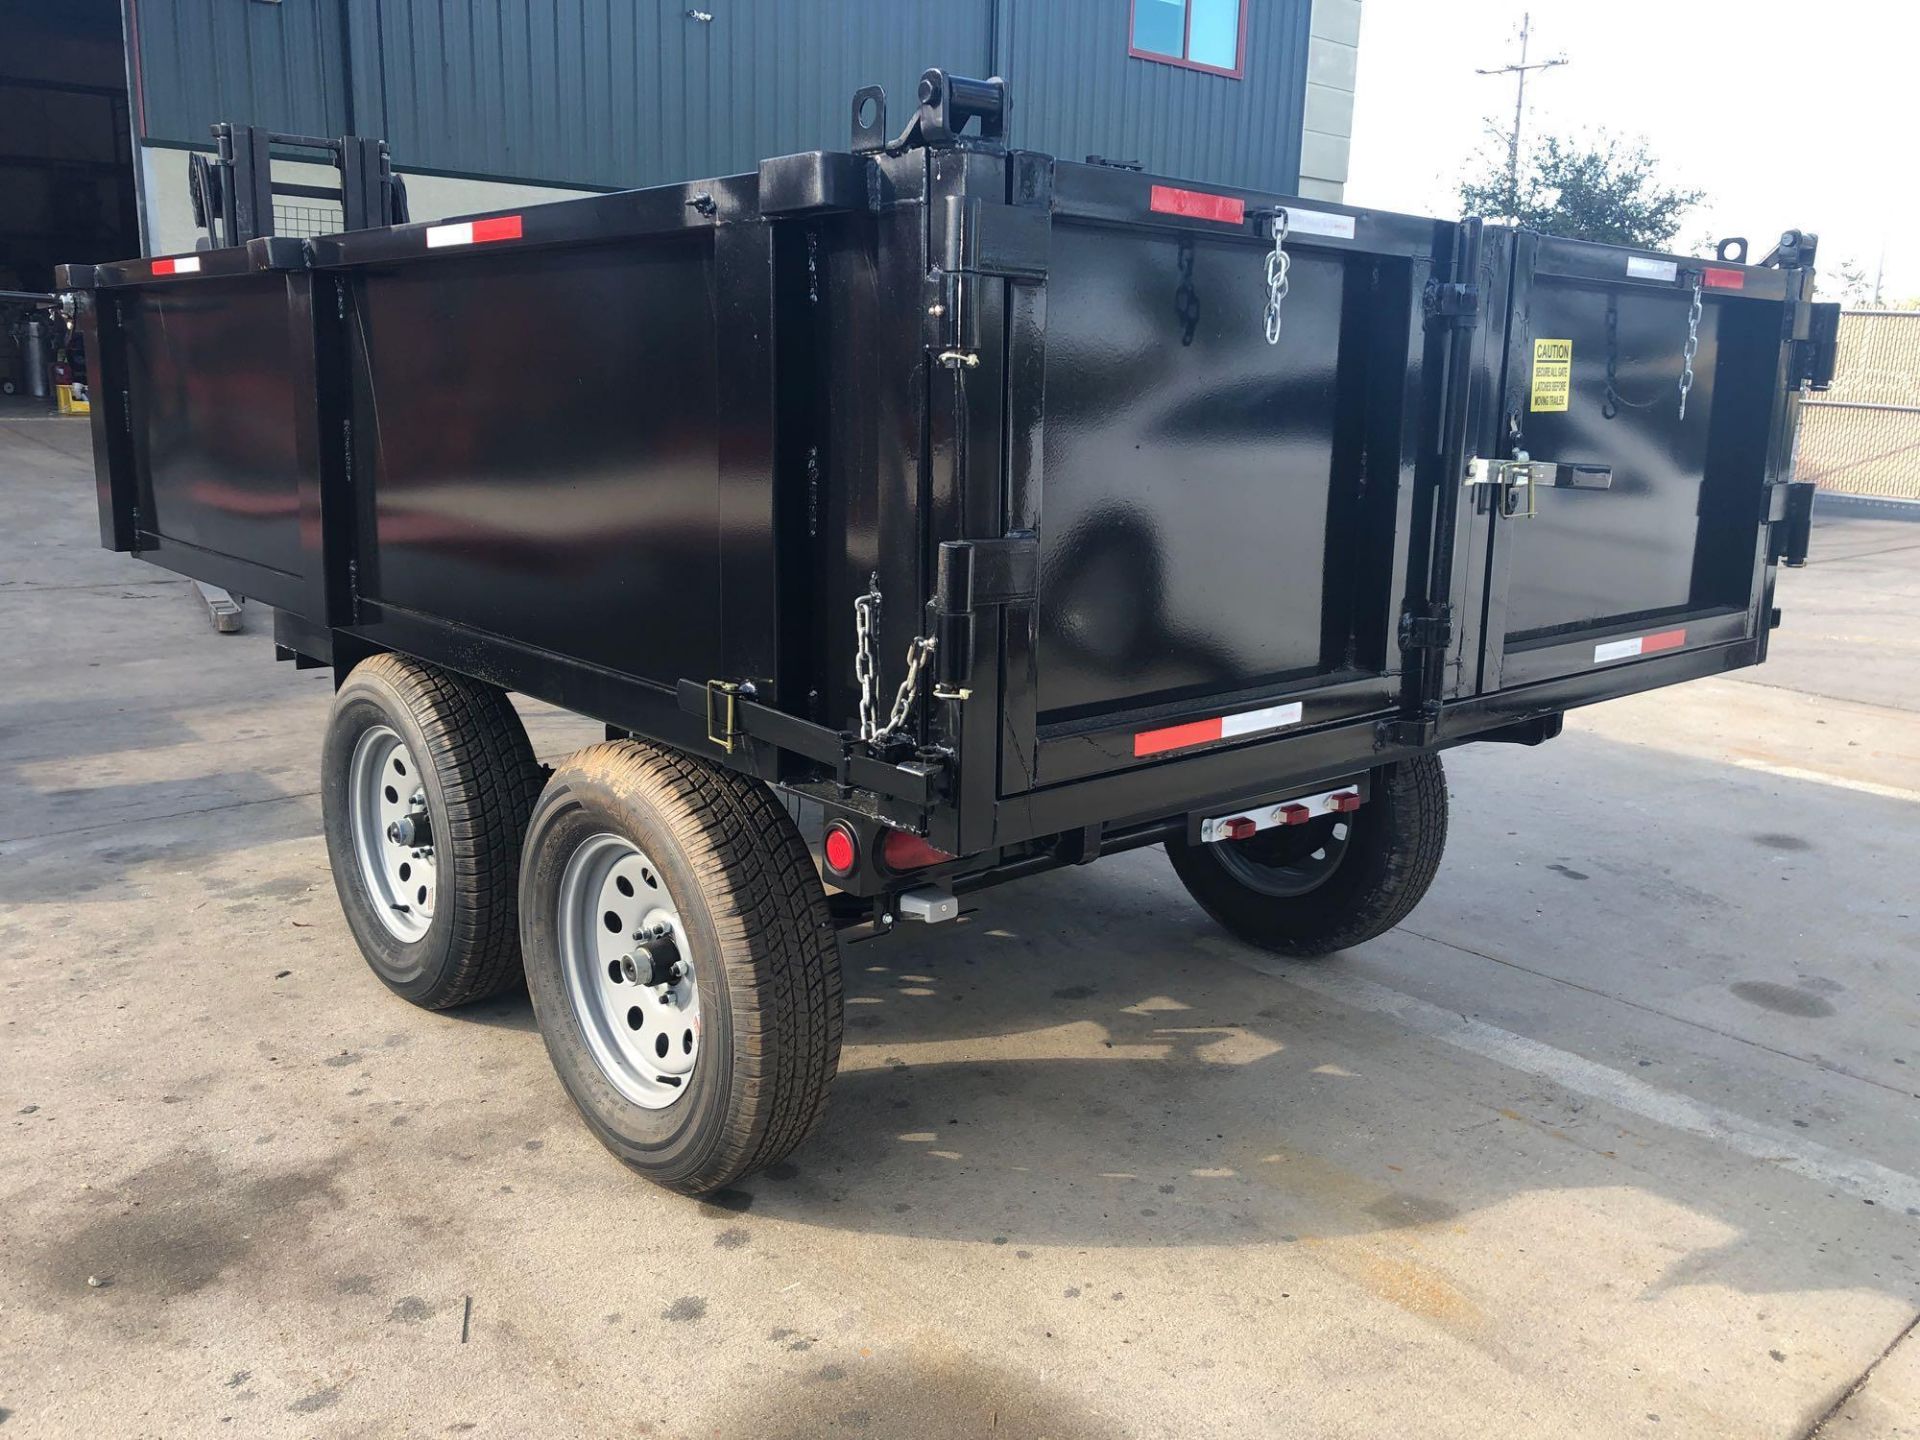 2019 SS DUMP TRIALER W/ ELECTRIC REMOTE, DUAL AXLE, 7,000 LB GVWR - Image 5 of 11